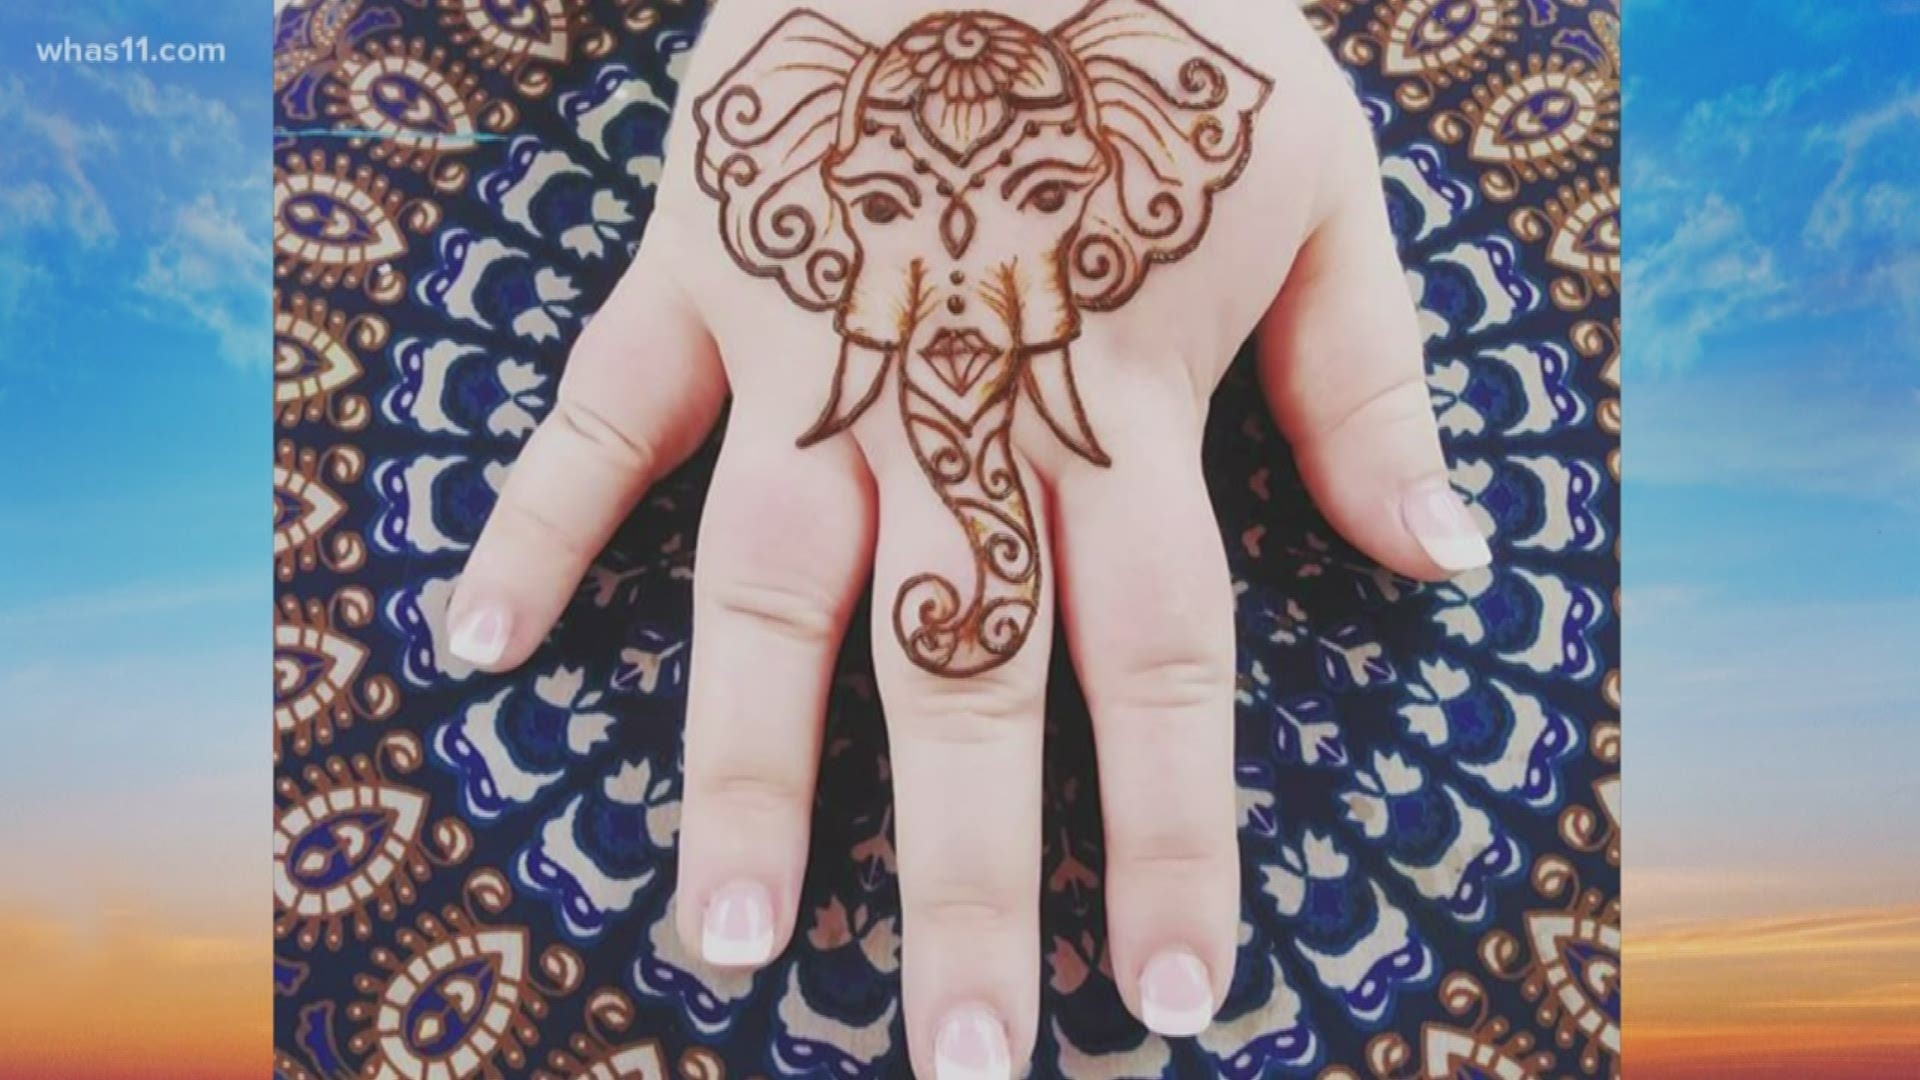 For more information on JessiKay Henna, follow her on Facebook at @JessiKayHenna or email her JessiKayHenna@gmail.com.